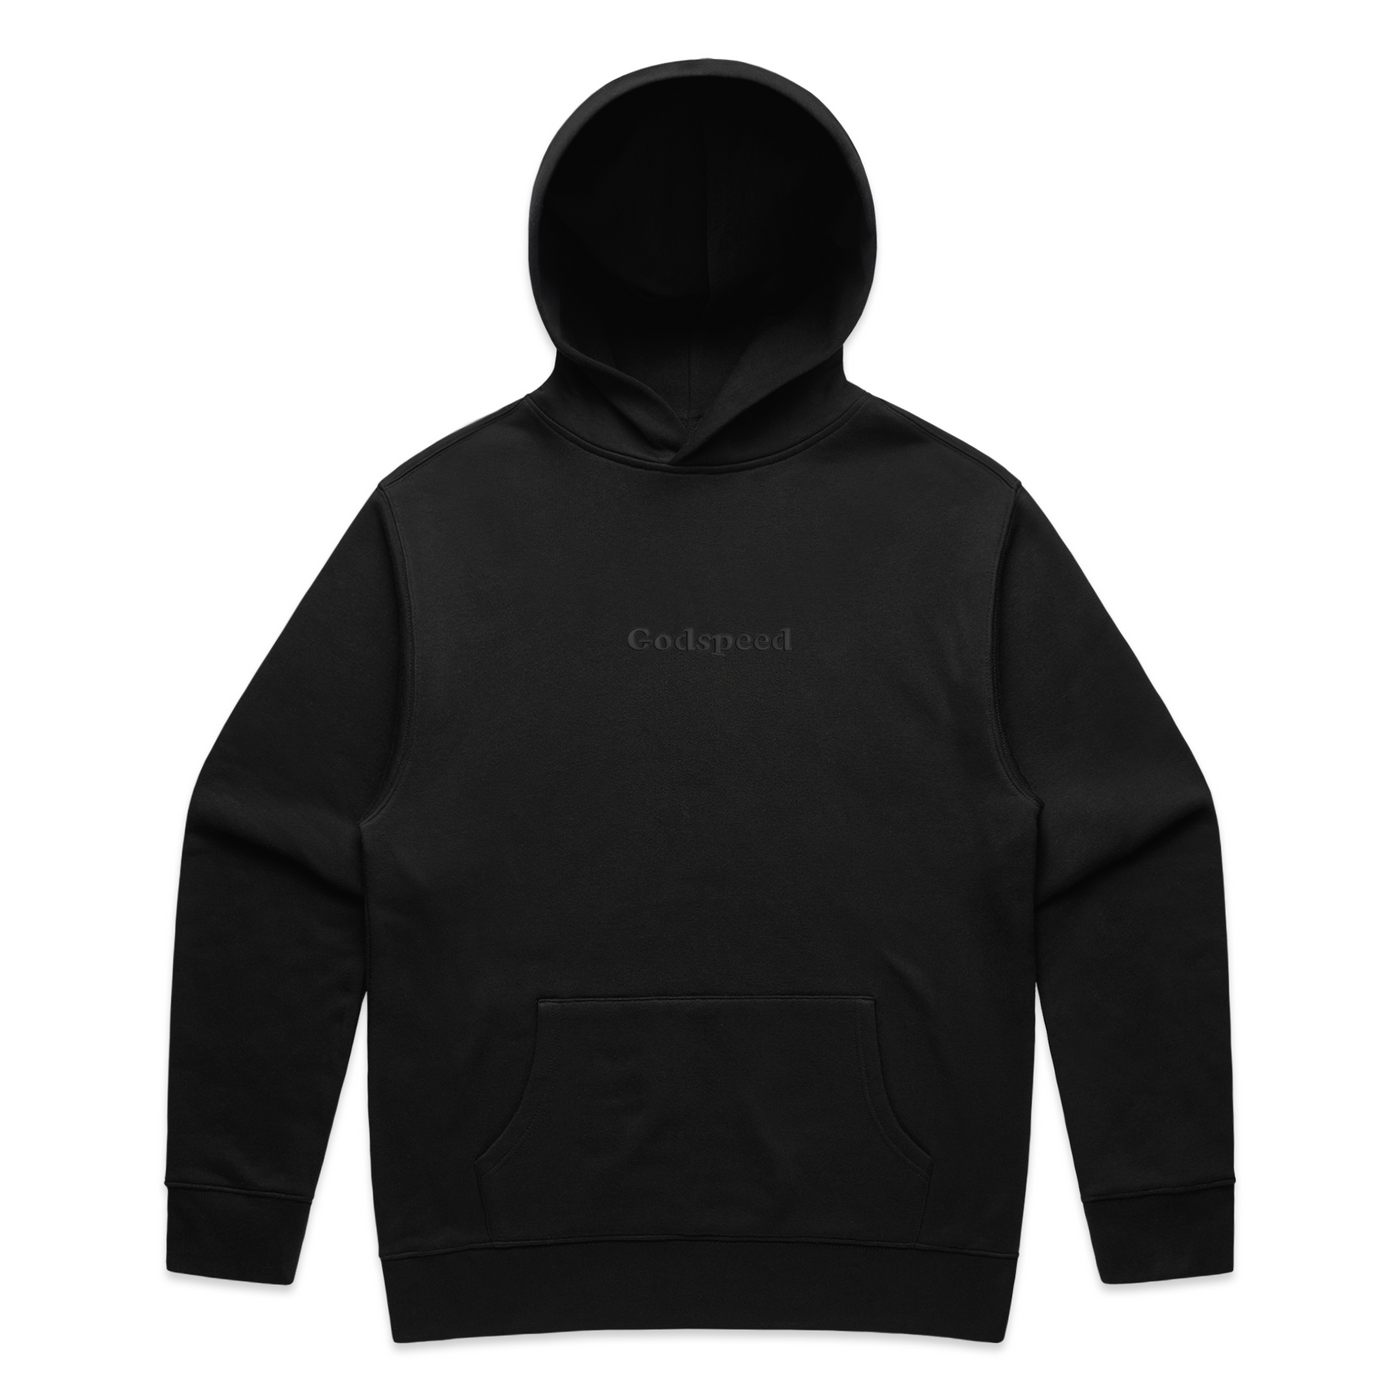 Embroidered Frank Godspeed Hoodie